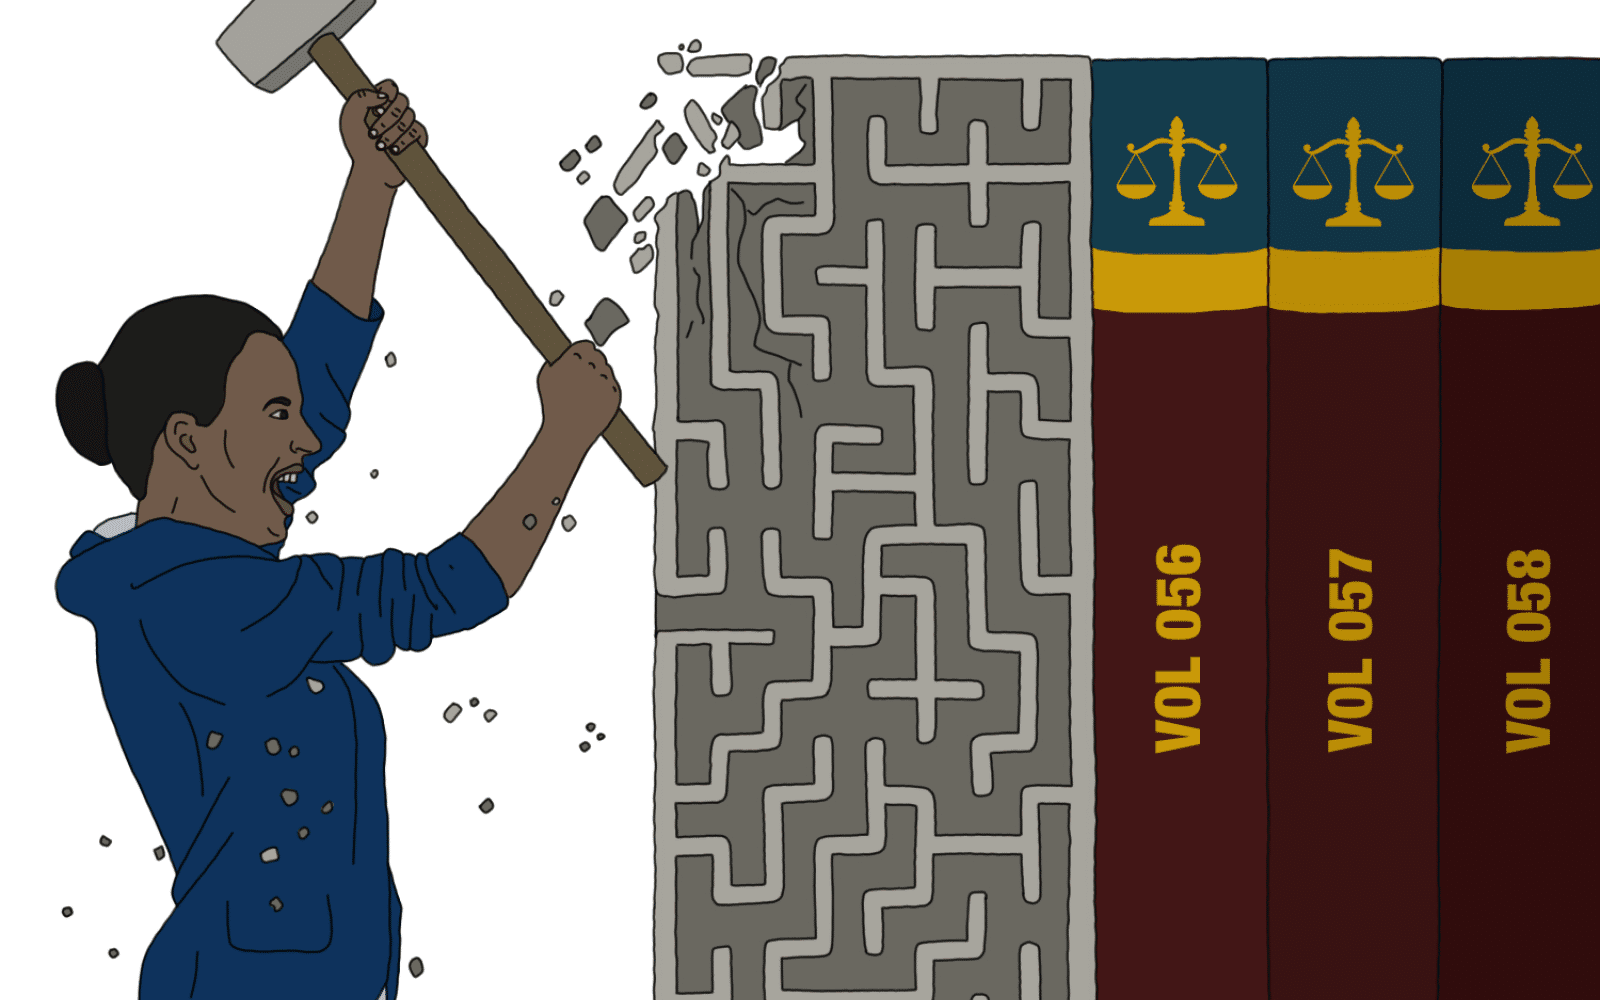 A lady breaking a maze to access legal books